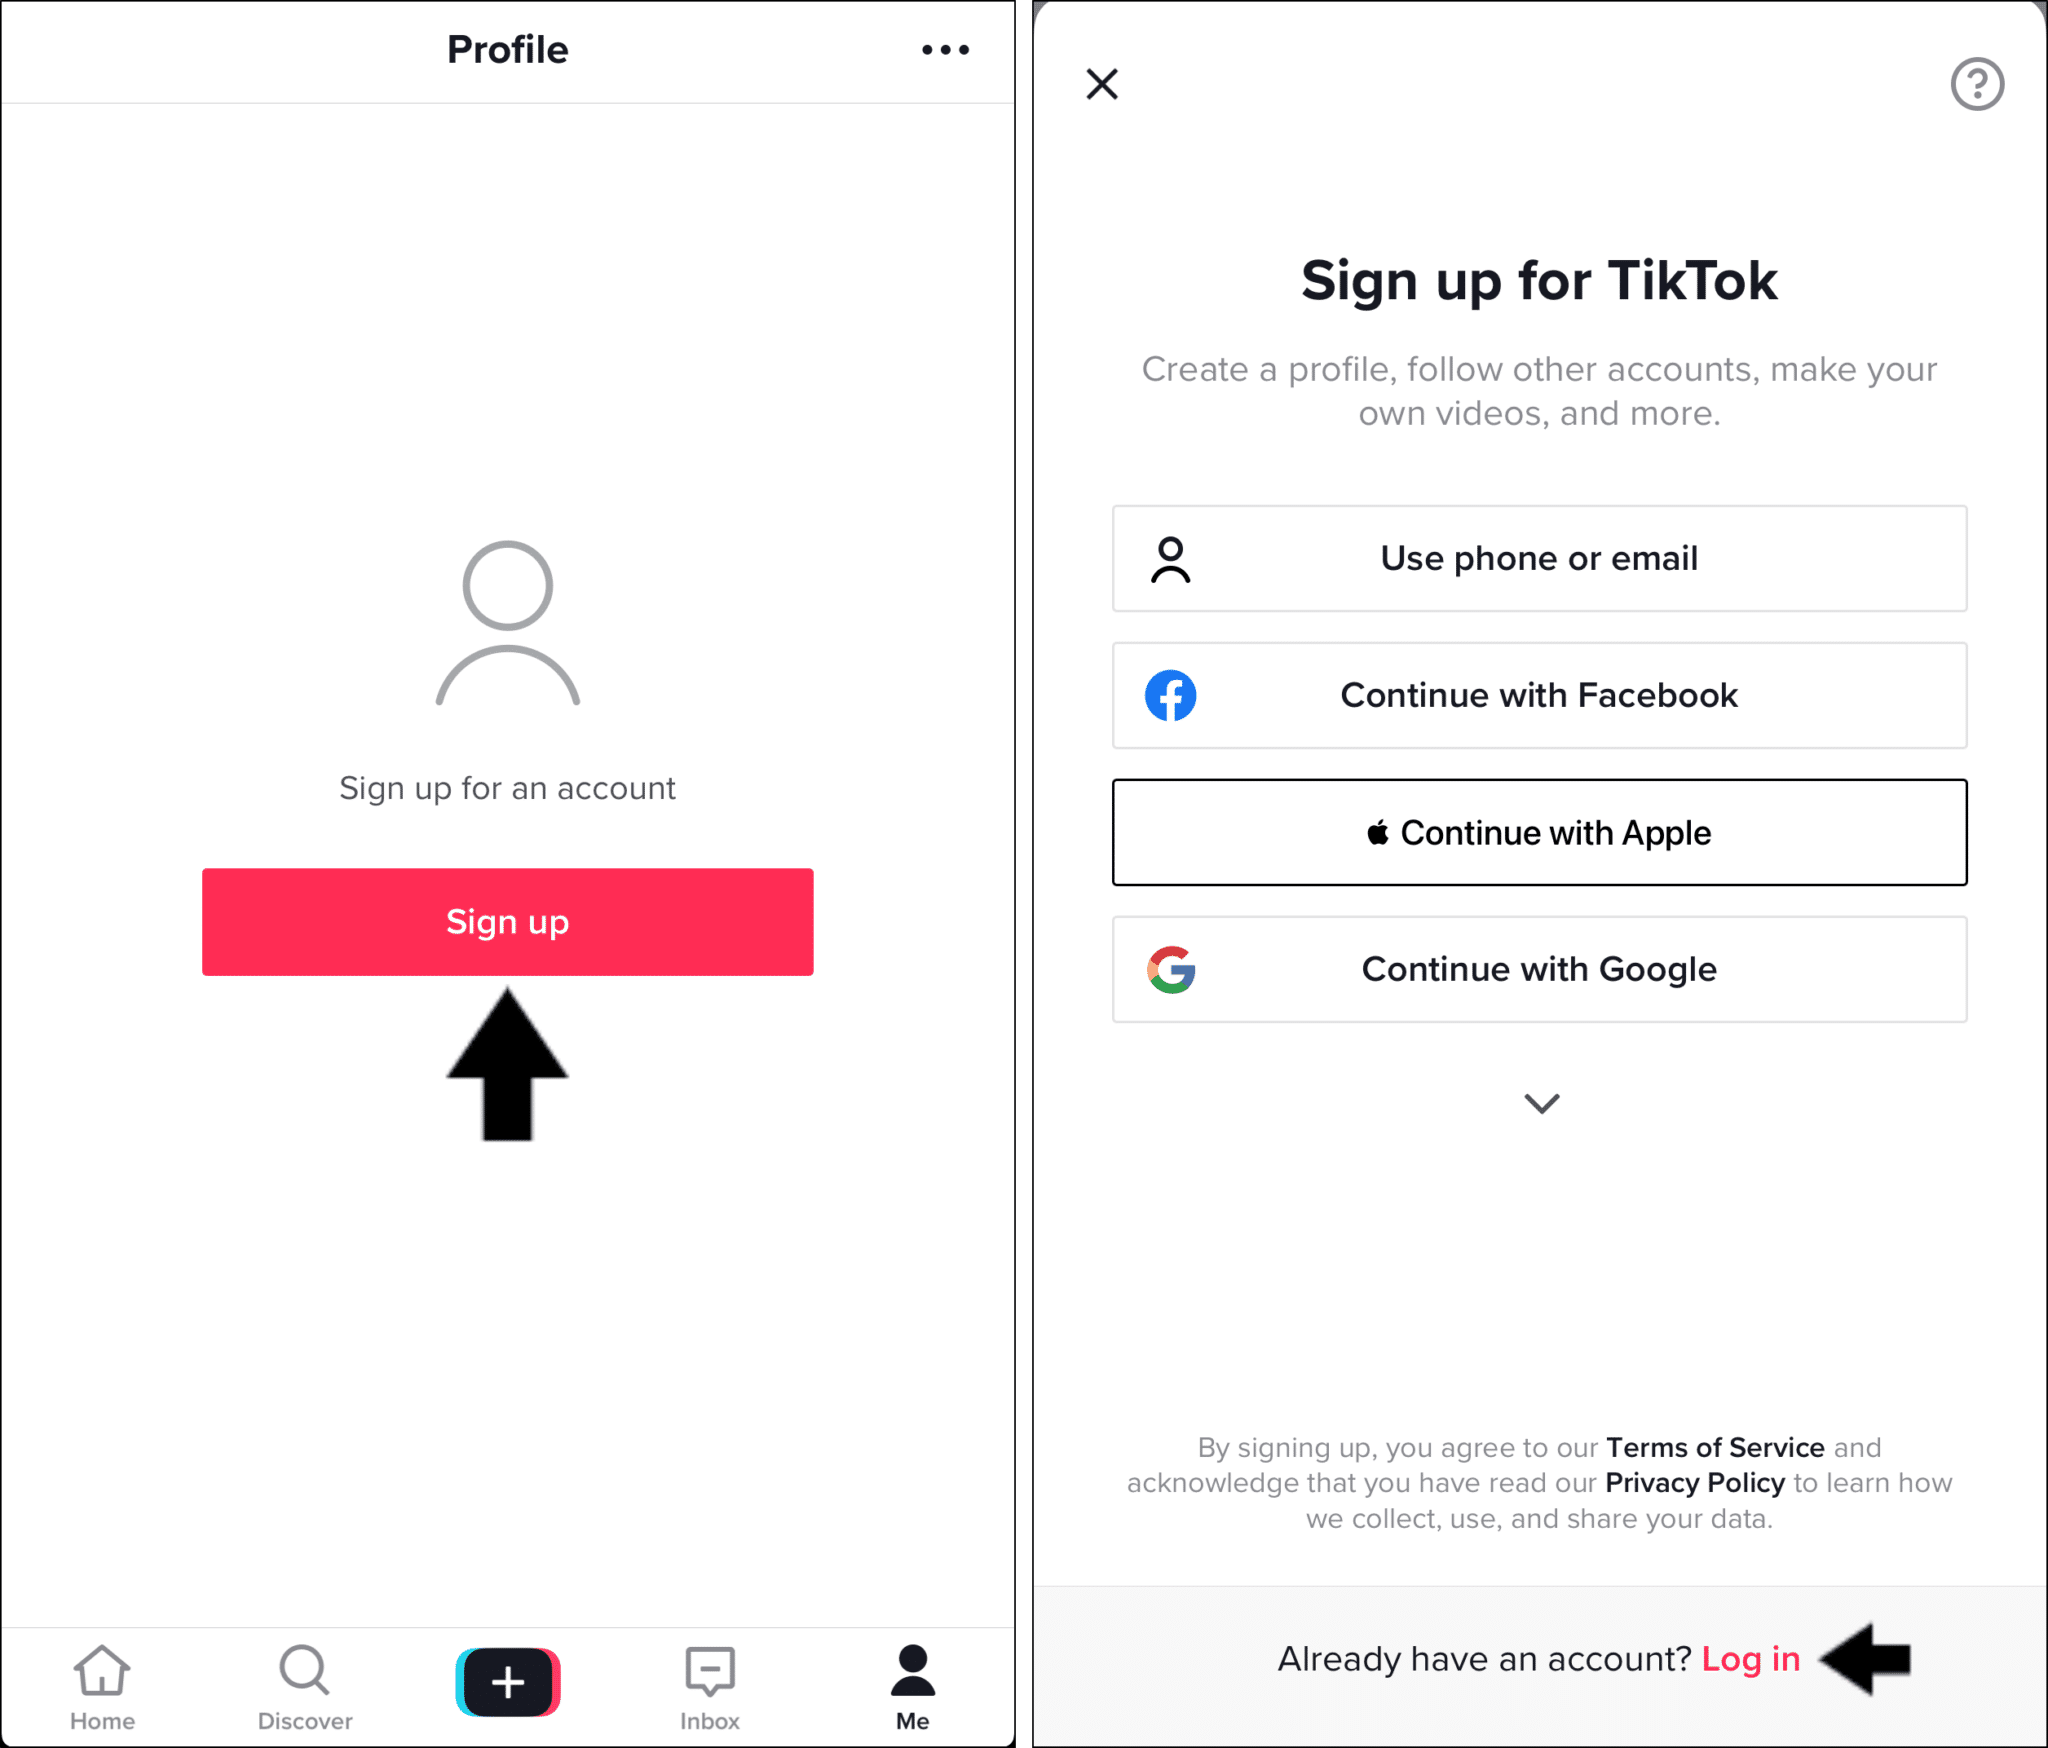 access TikTok login page to reset account password to fix can't log in to TikTok, "Too many attempts, please try again" error message, or login failed